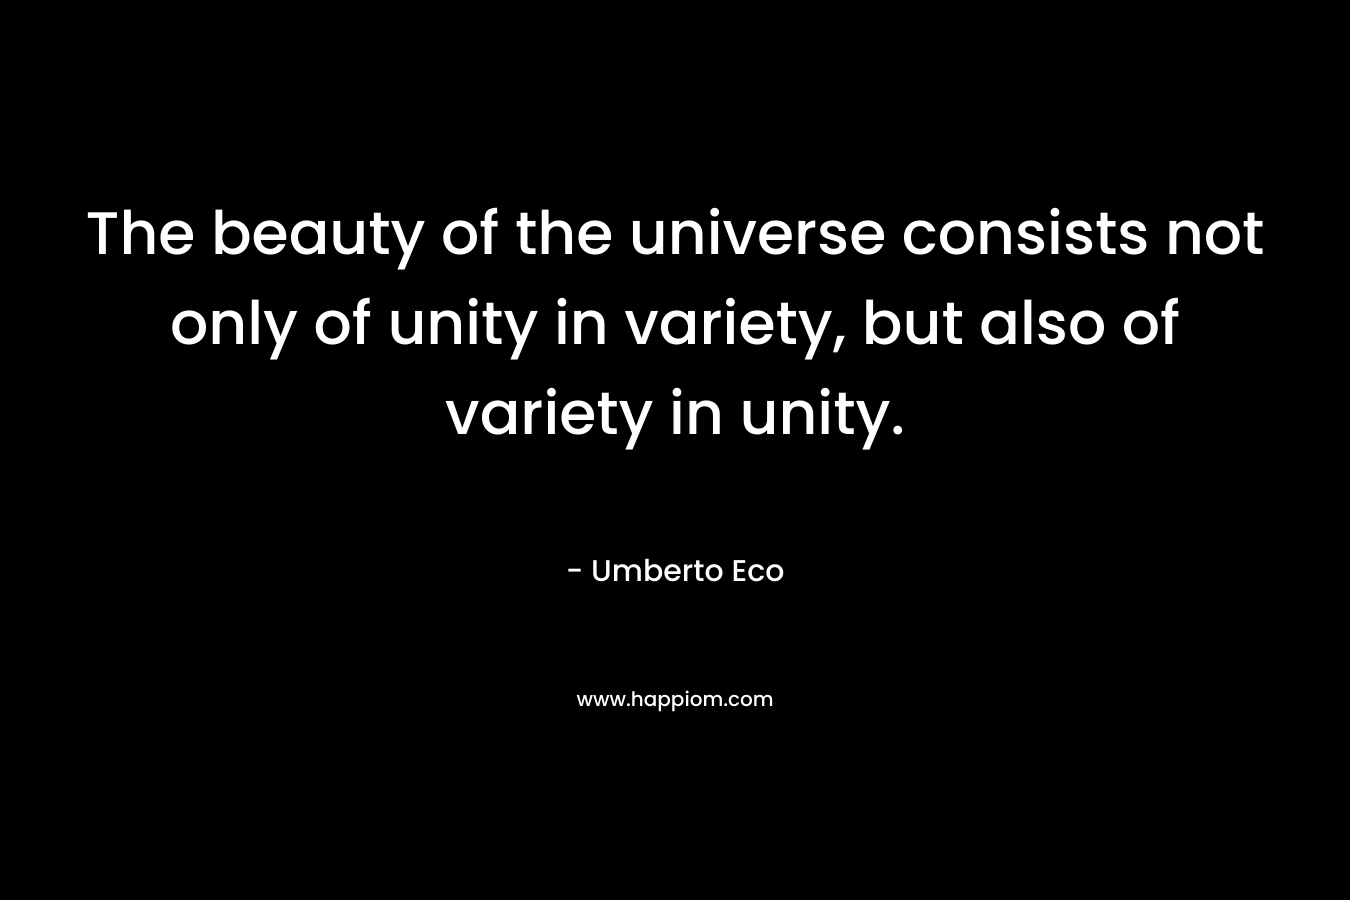 The beauty of the universe consists not only of unity in variety, but also of variety in unity. – Umberto Eco